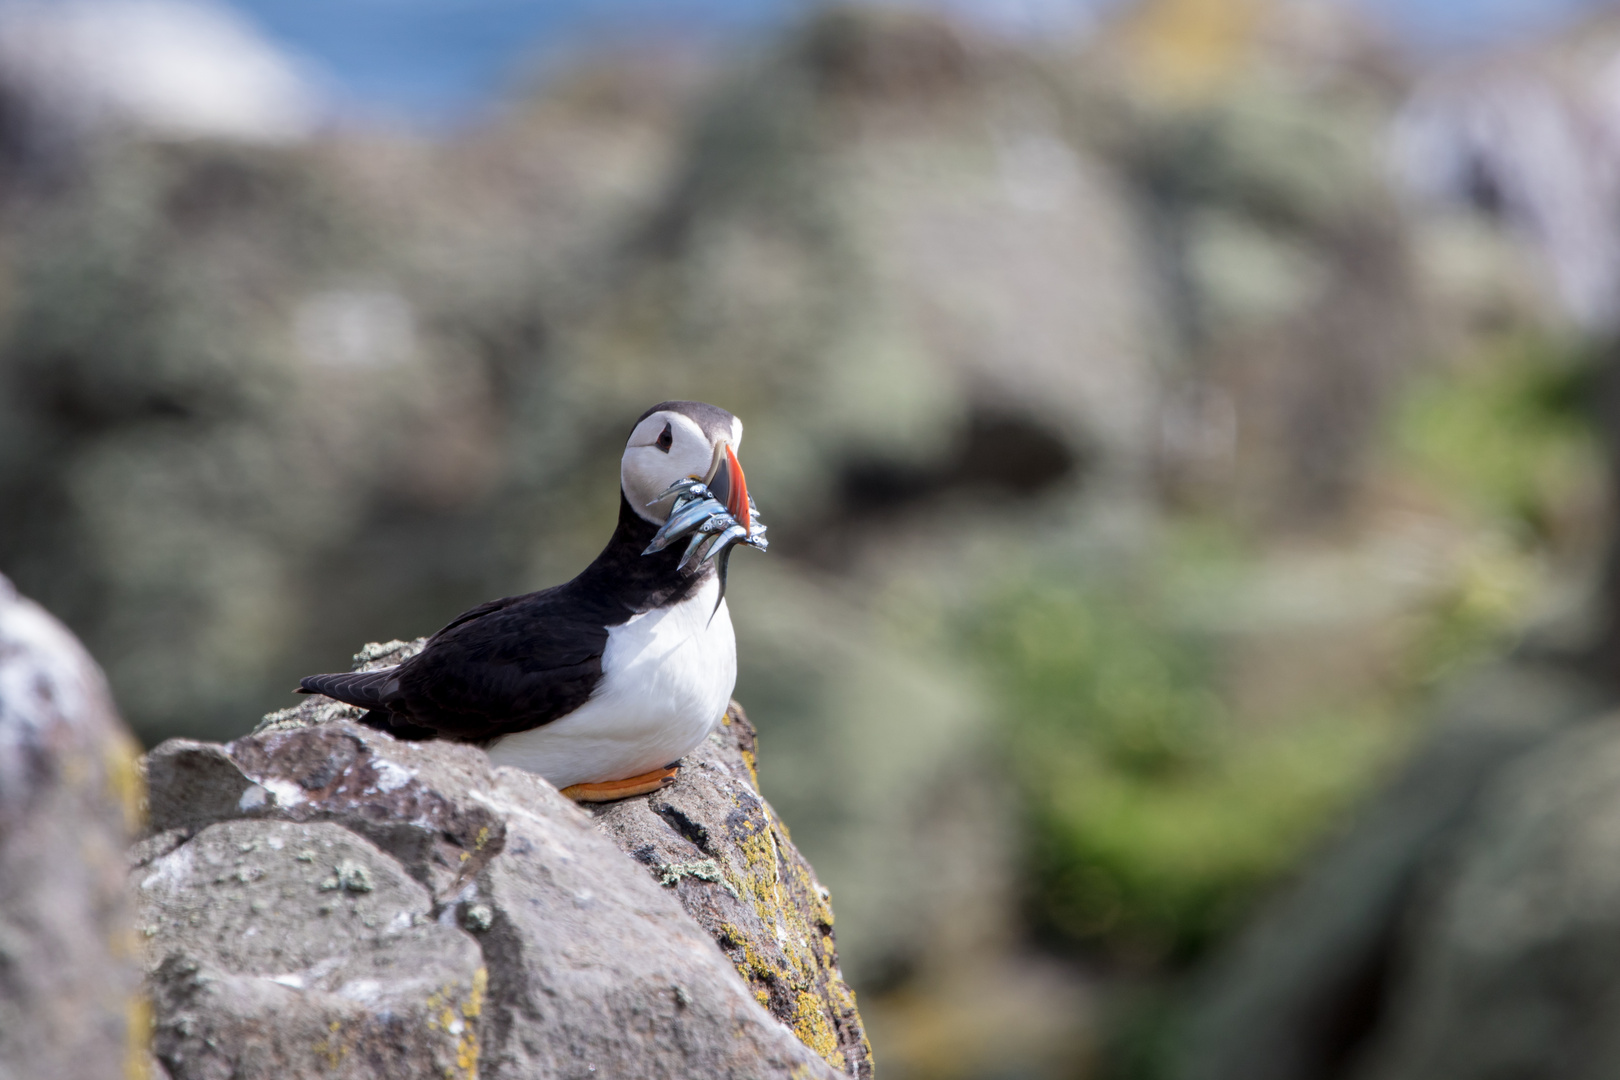 Puffin on the rocks